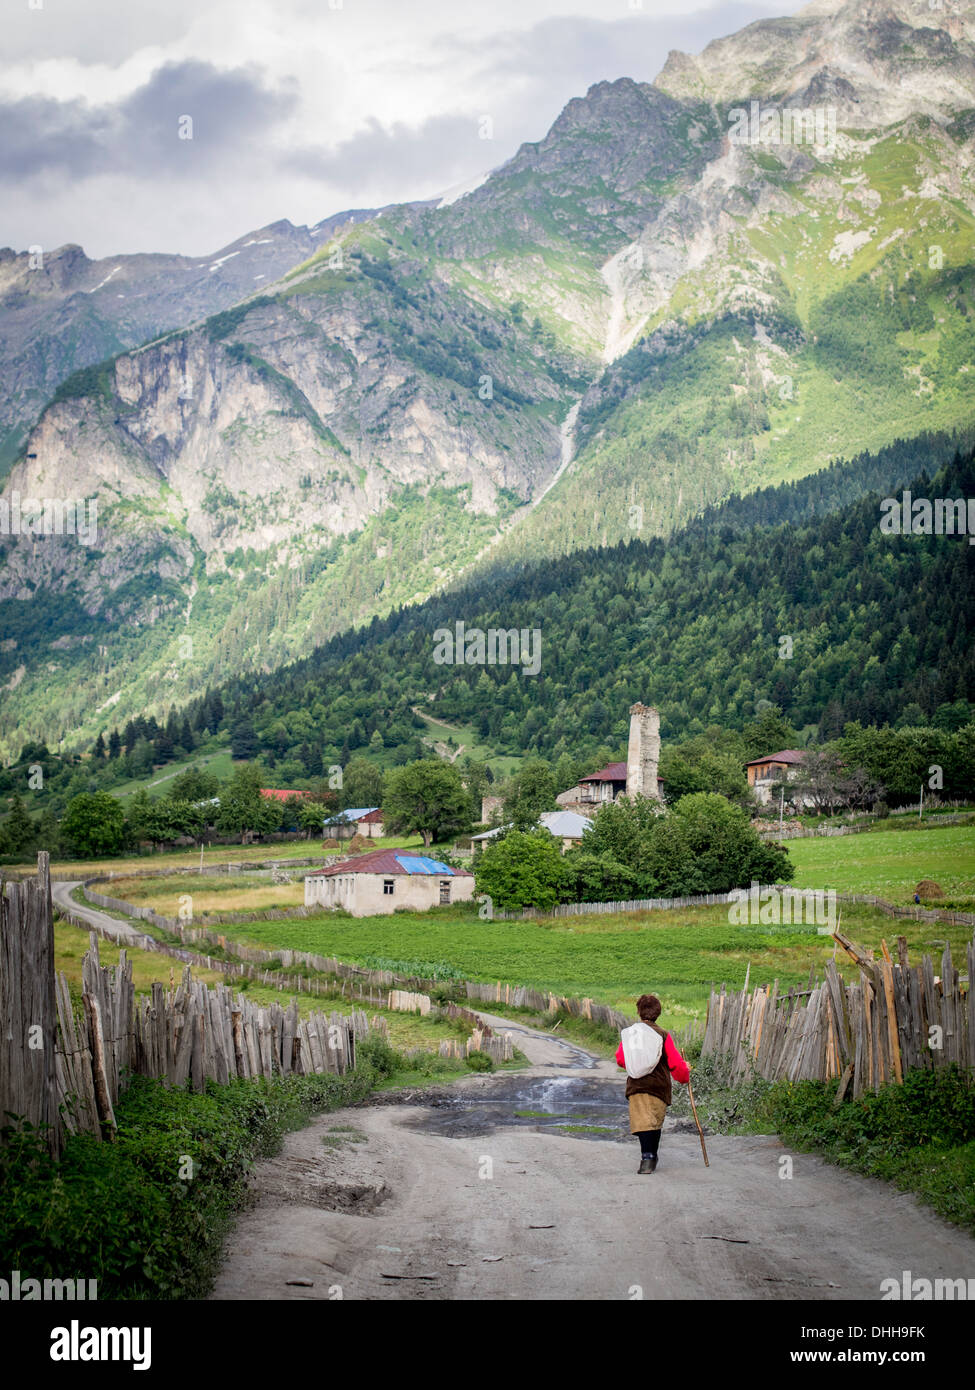 Adishi village in Upper Svaneti, Georgia, Caucasus. The region is known for its medieval defensive towers. Stock Photo